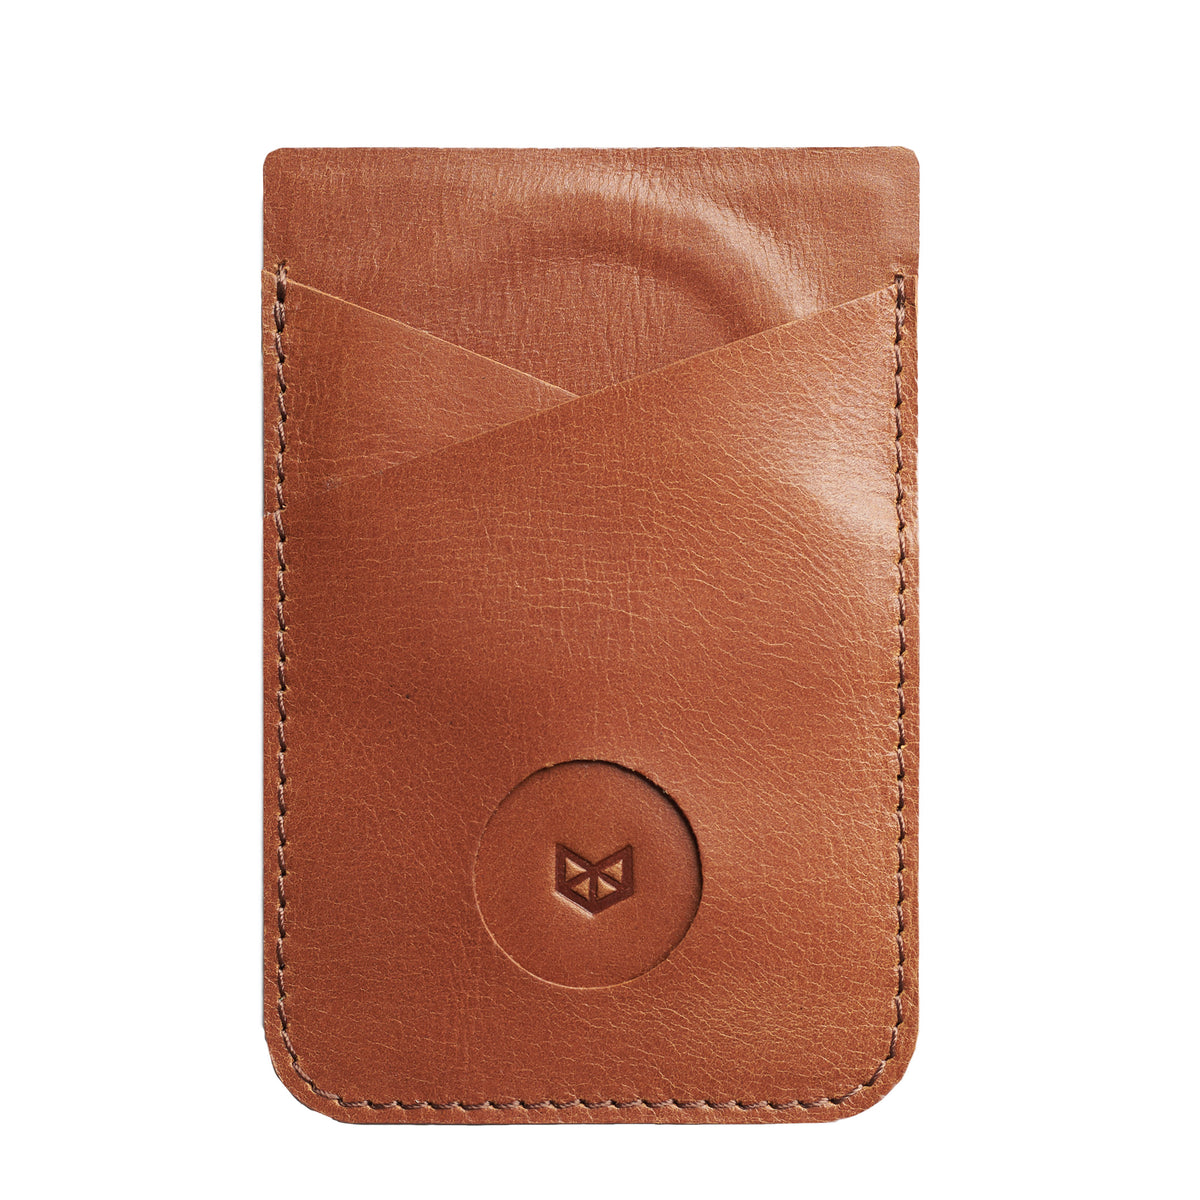 Cover. Small Gear Travel Pouch 2 Tan by Capra Leather